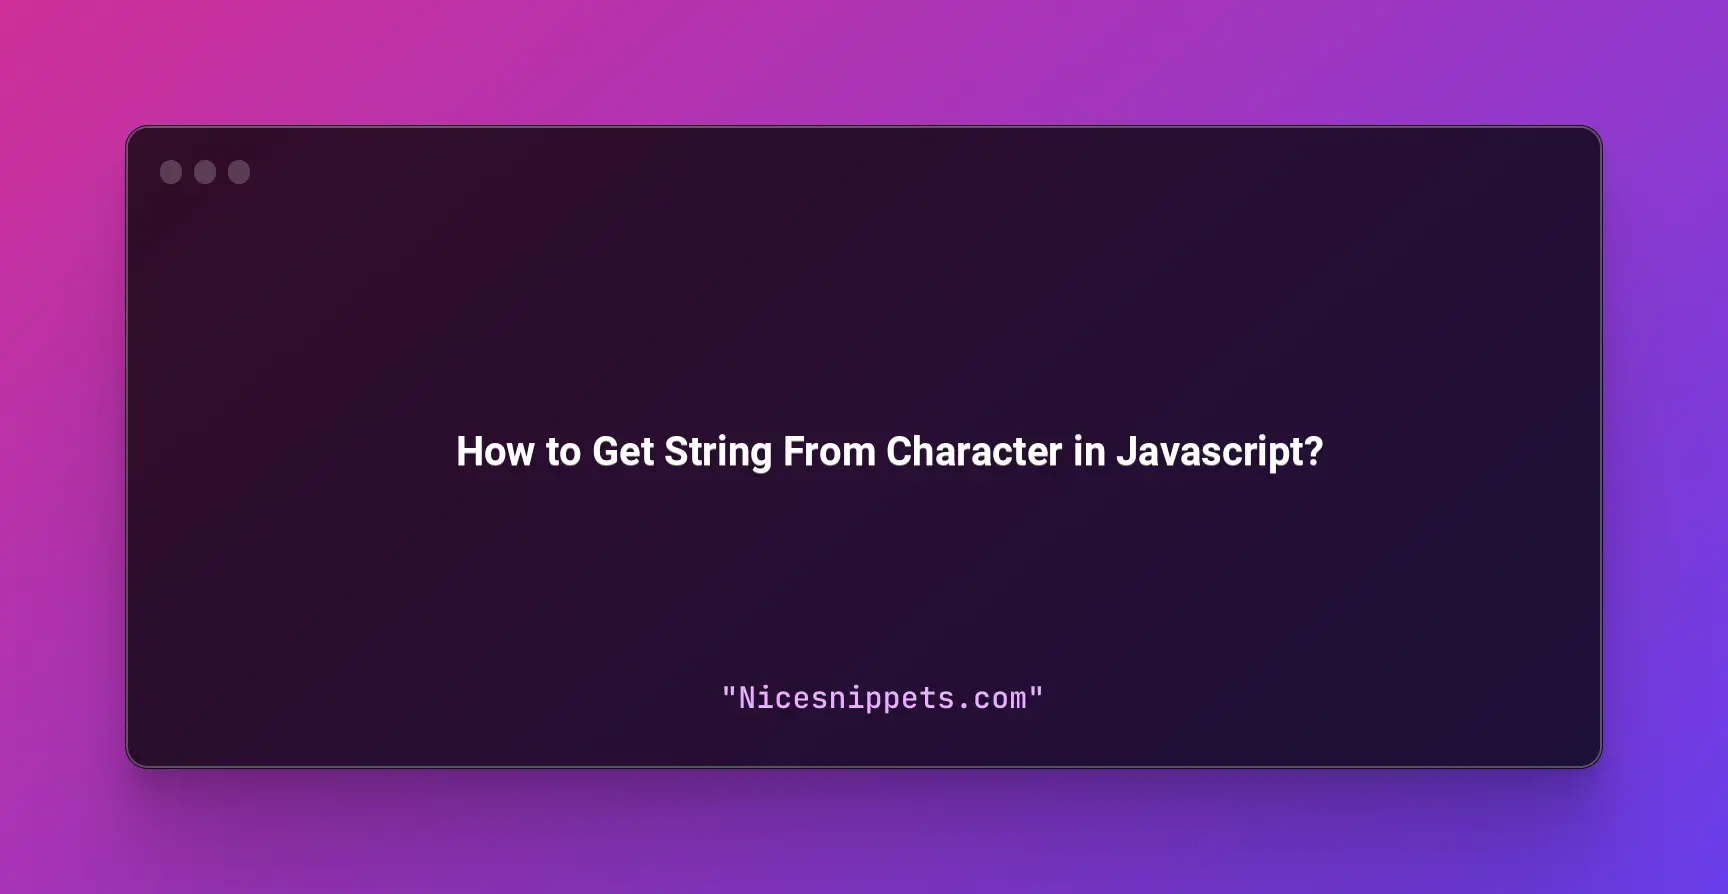 How to Get String From Character in Javascript?